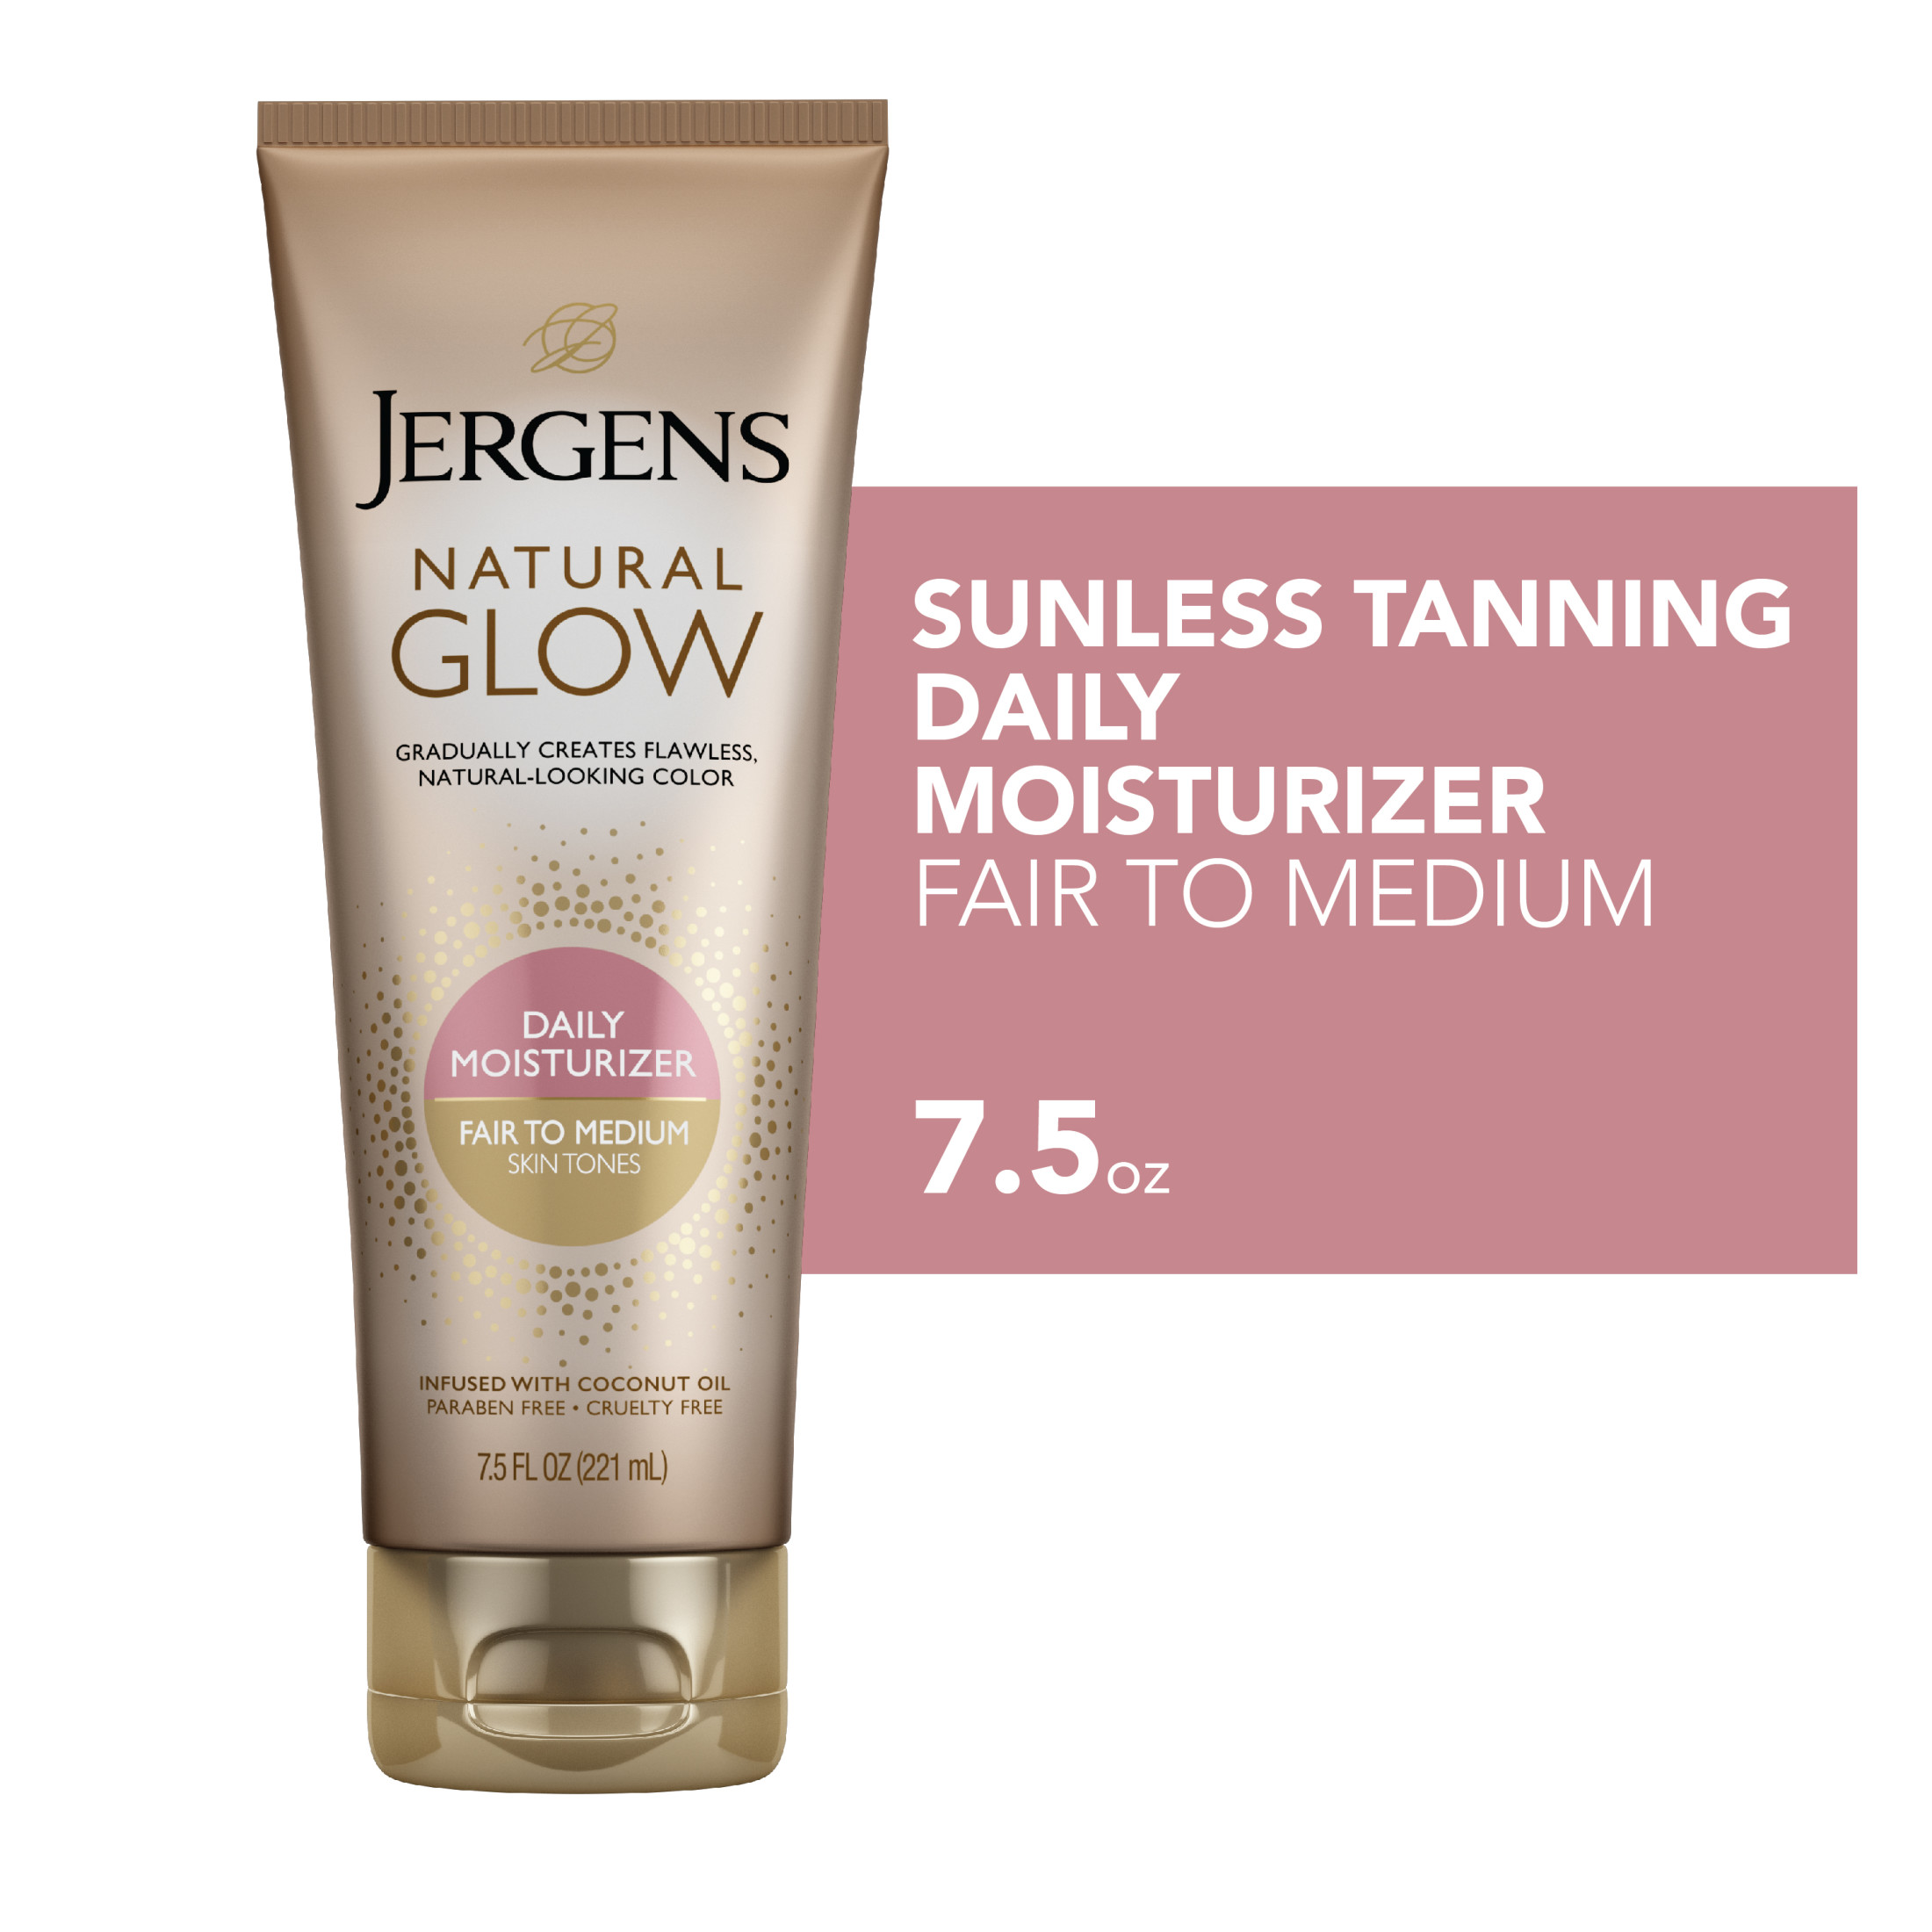 Jergens Natural Glow Self Tanner Lotion, Sunless Tanning Moisturizer for Fair to Medium Skin Tone, 7.5 fl oz - image 1 of 11